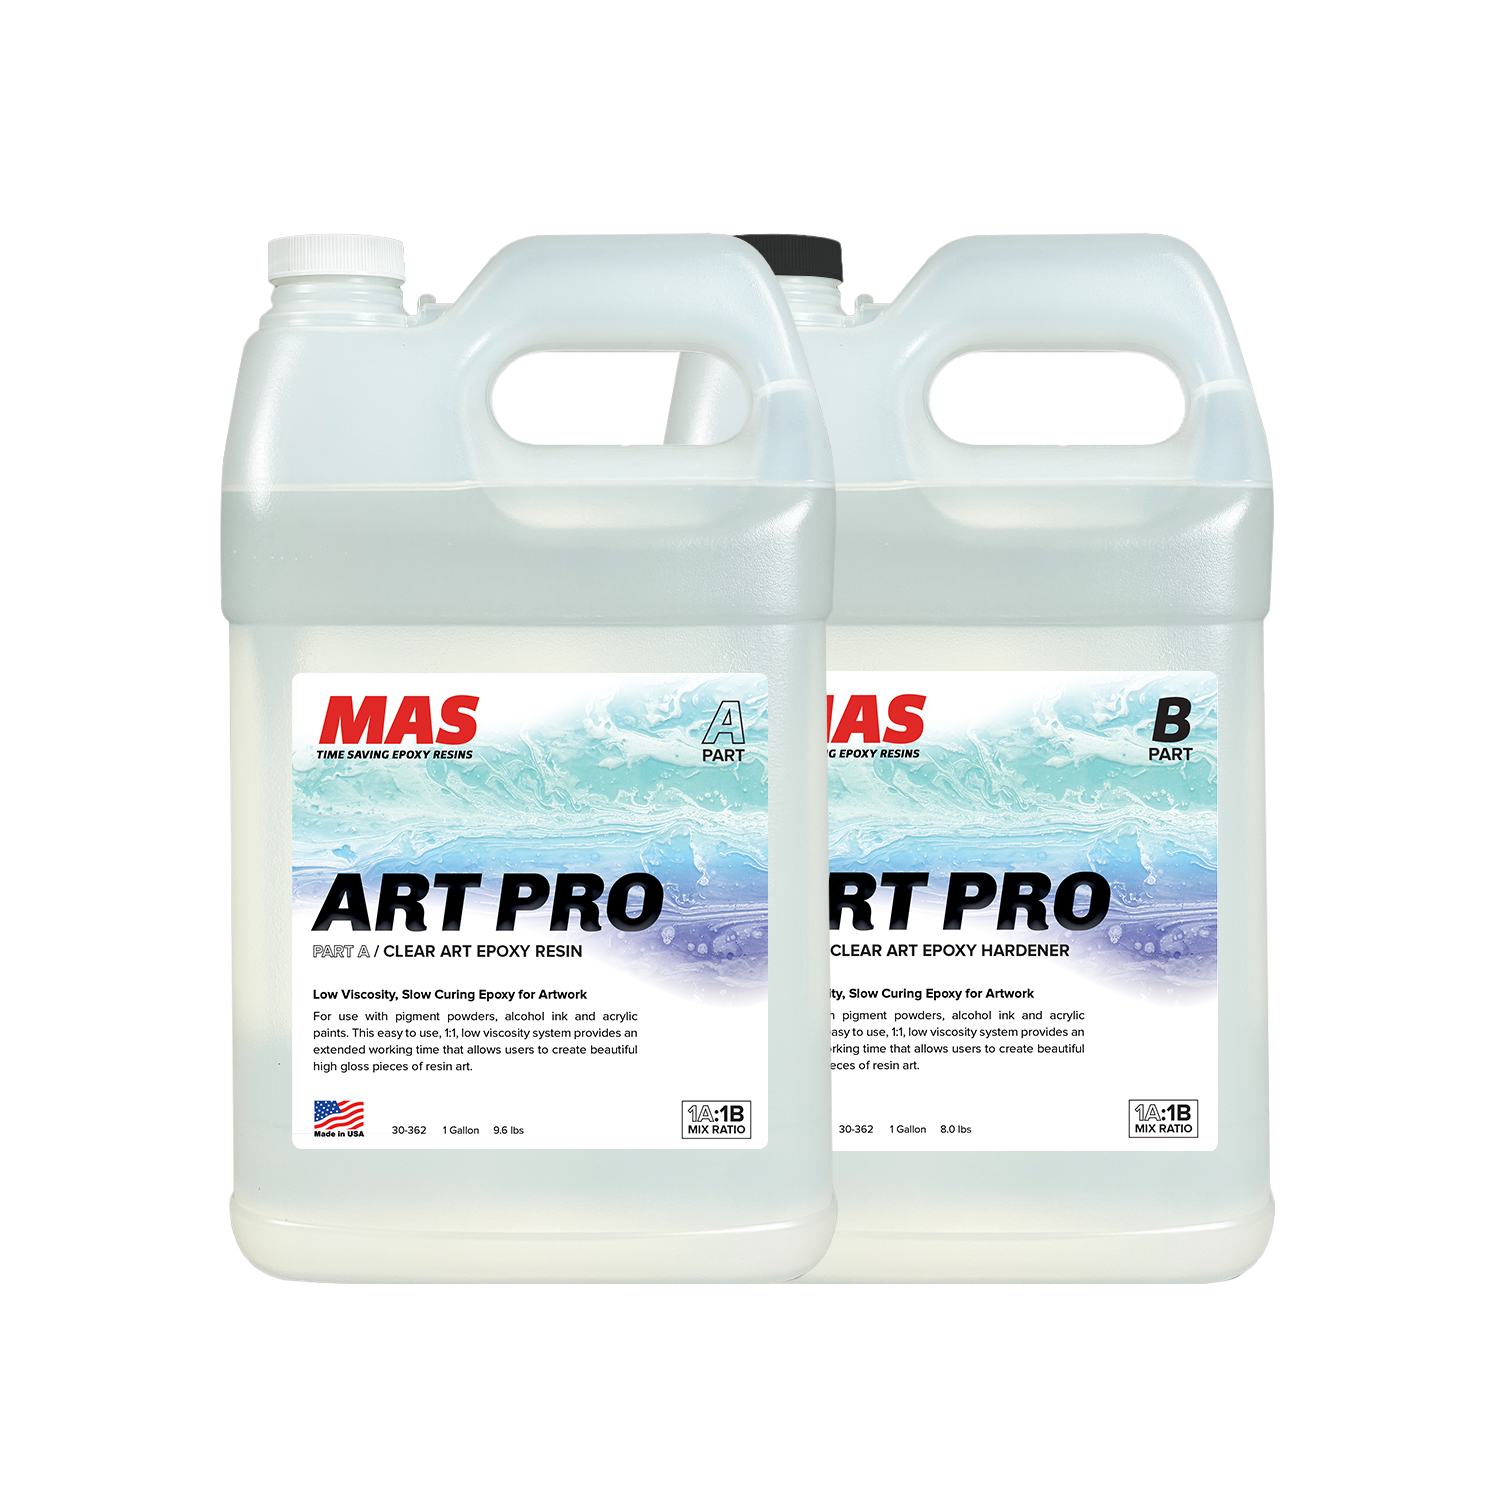 Art Pro Epoxy Resin with UV Resistance and Extended Working Times Questions & Answers